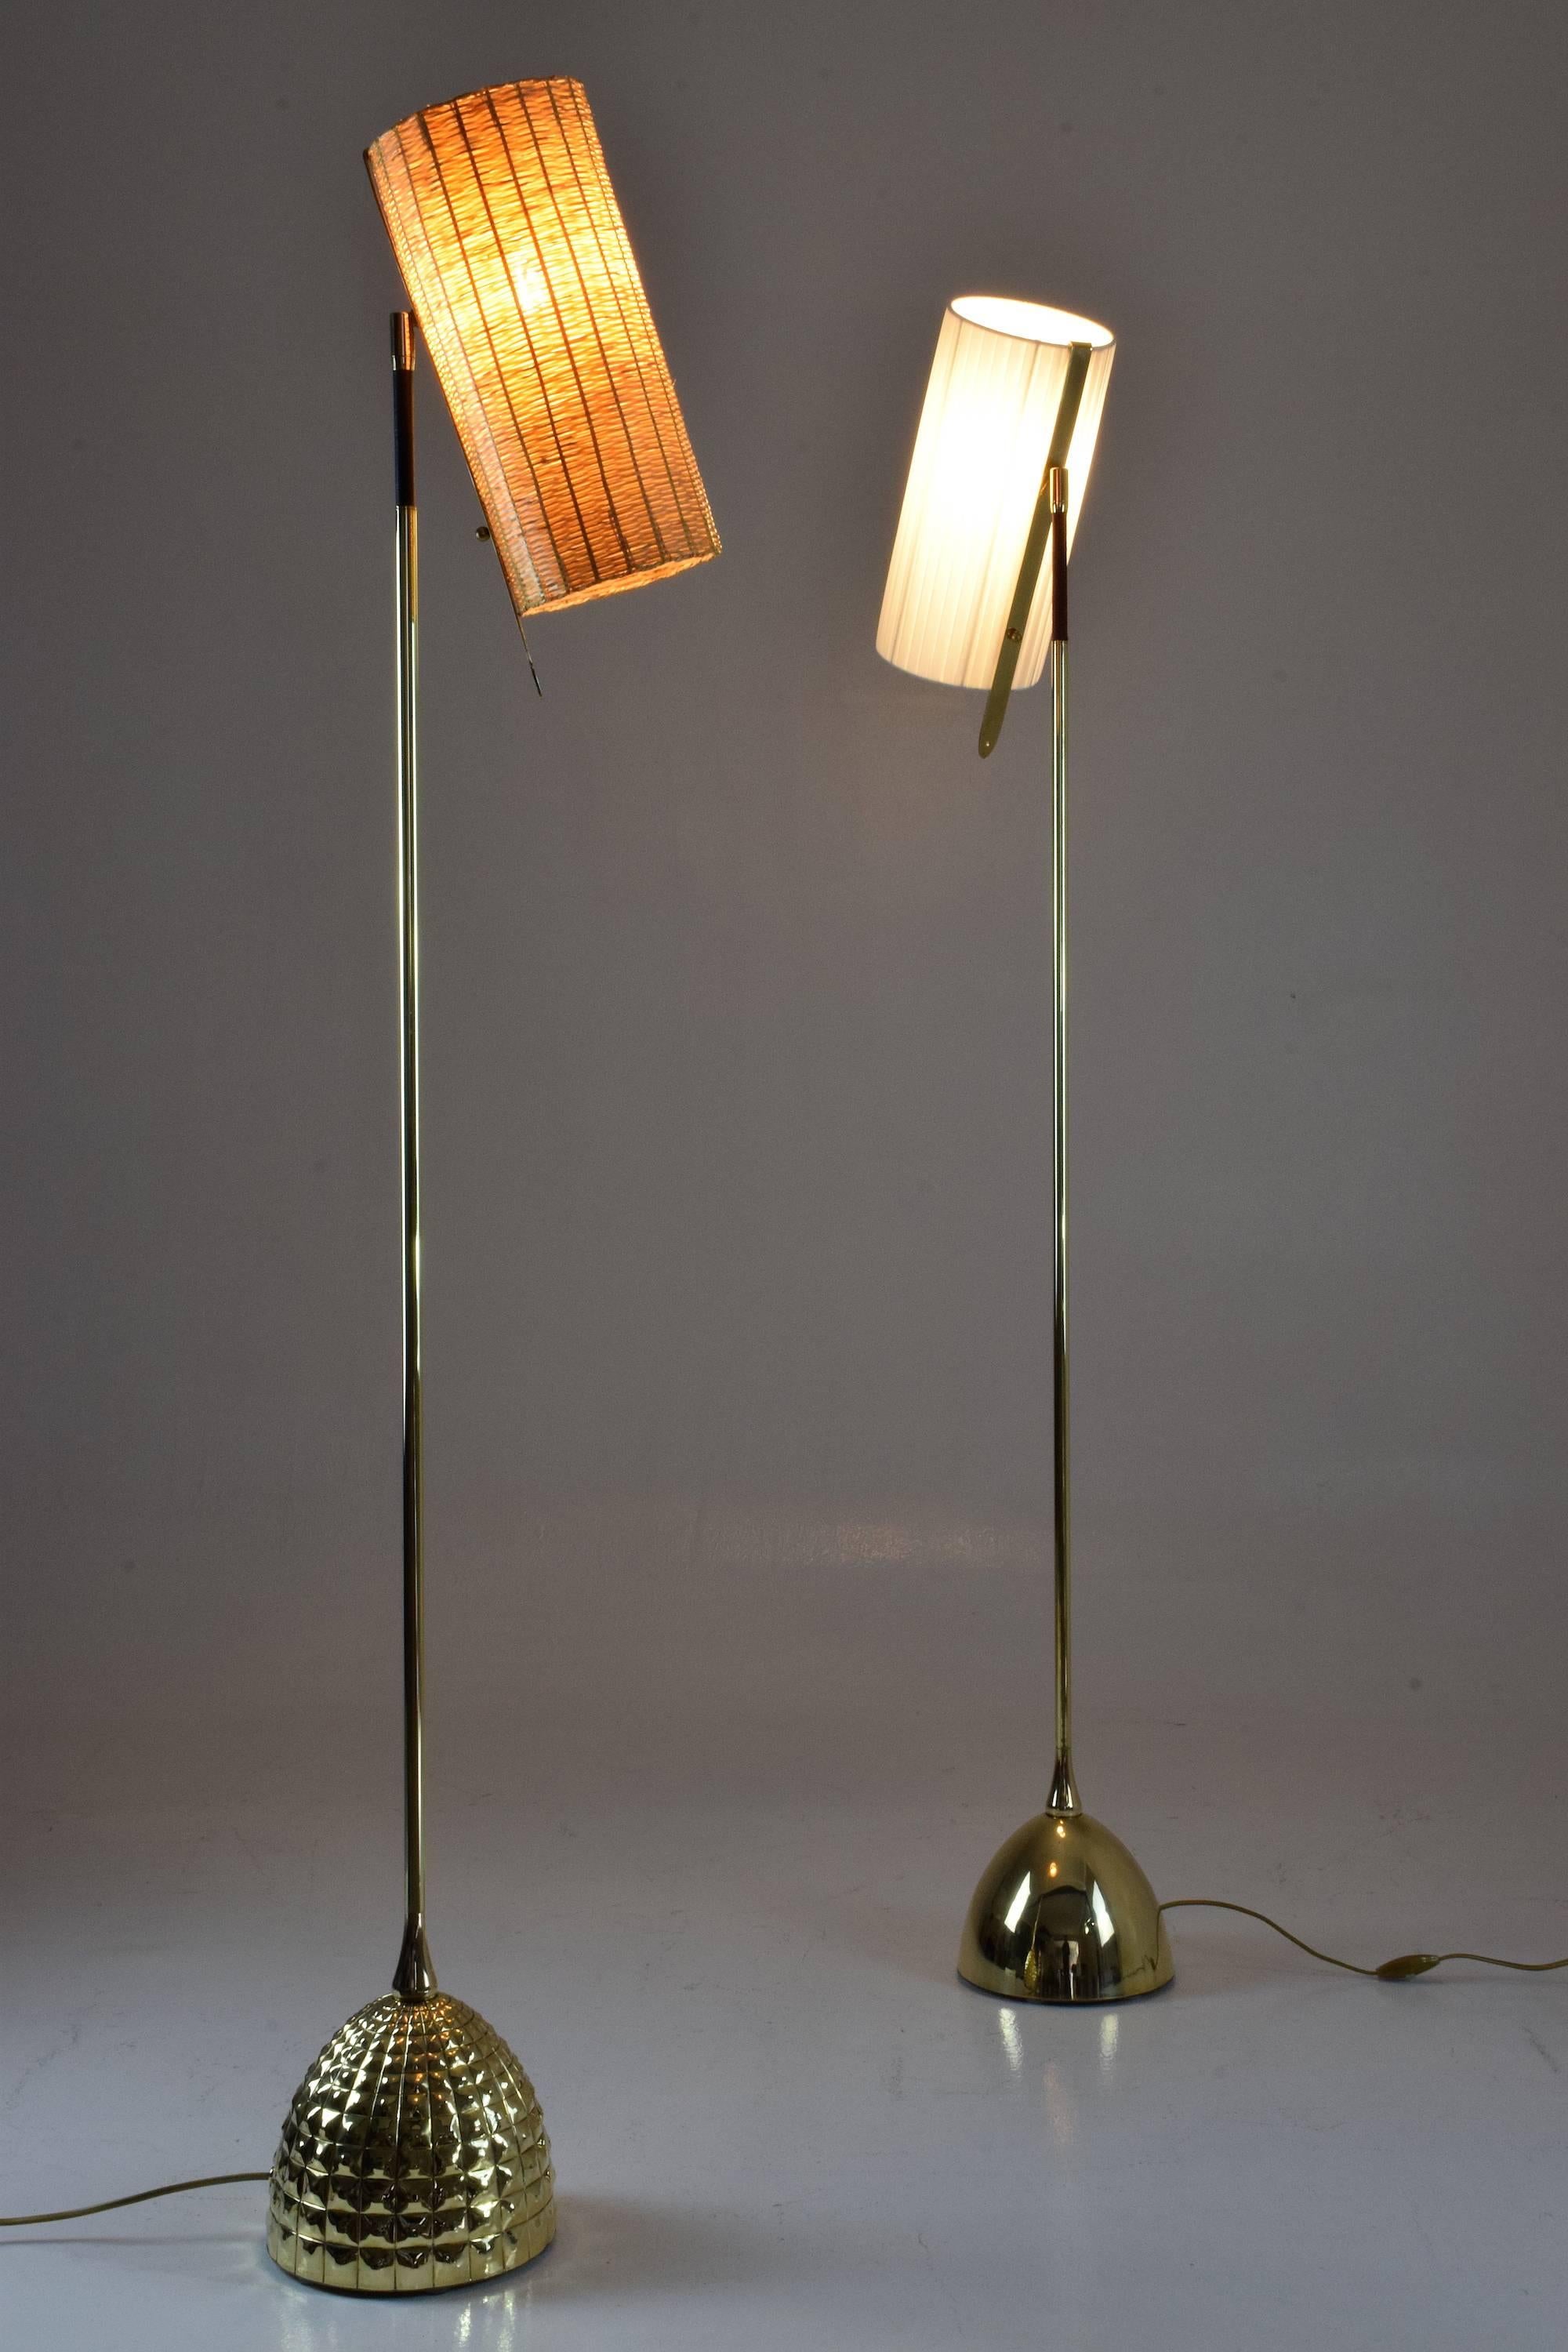 Organic Modern Equilibrium-VI Contemporary Handcrafted Articulating Brass Leather Floor Lamp